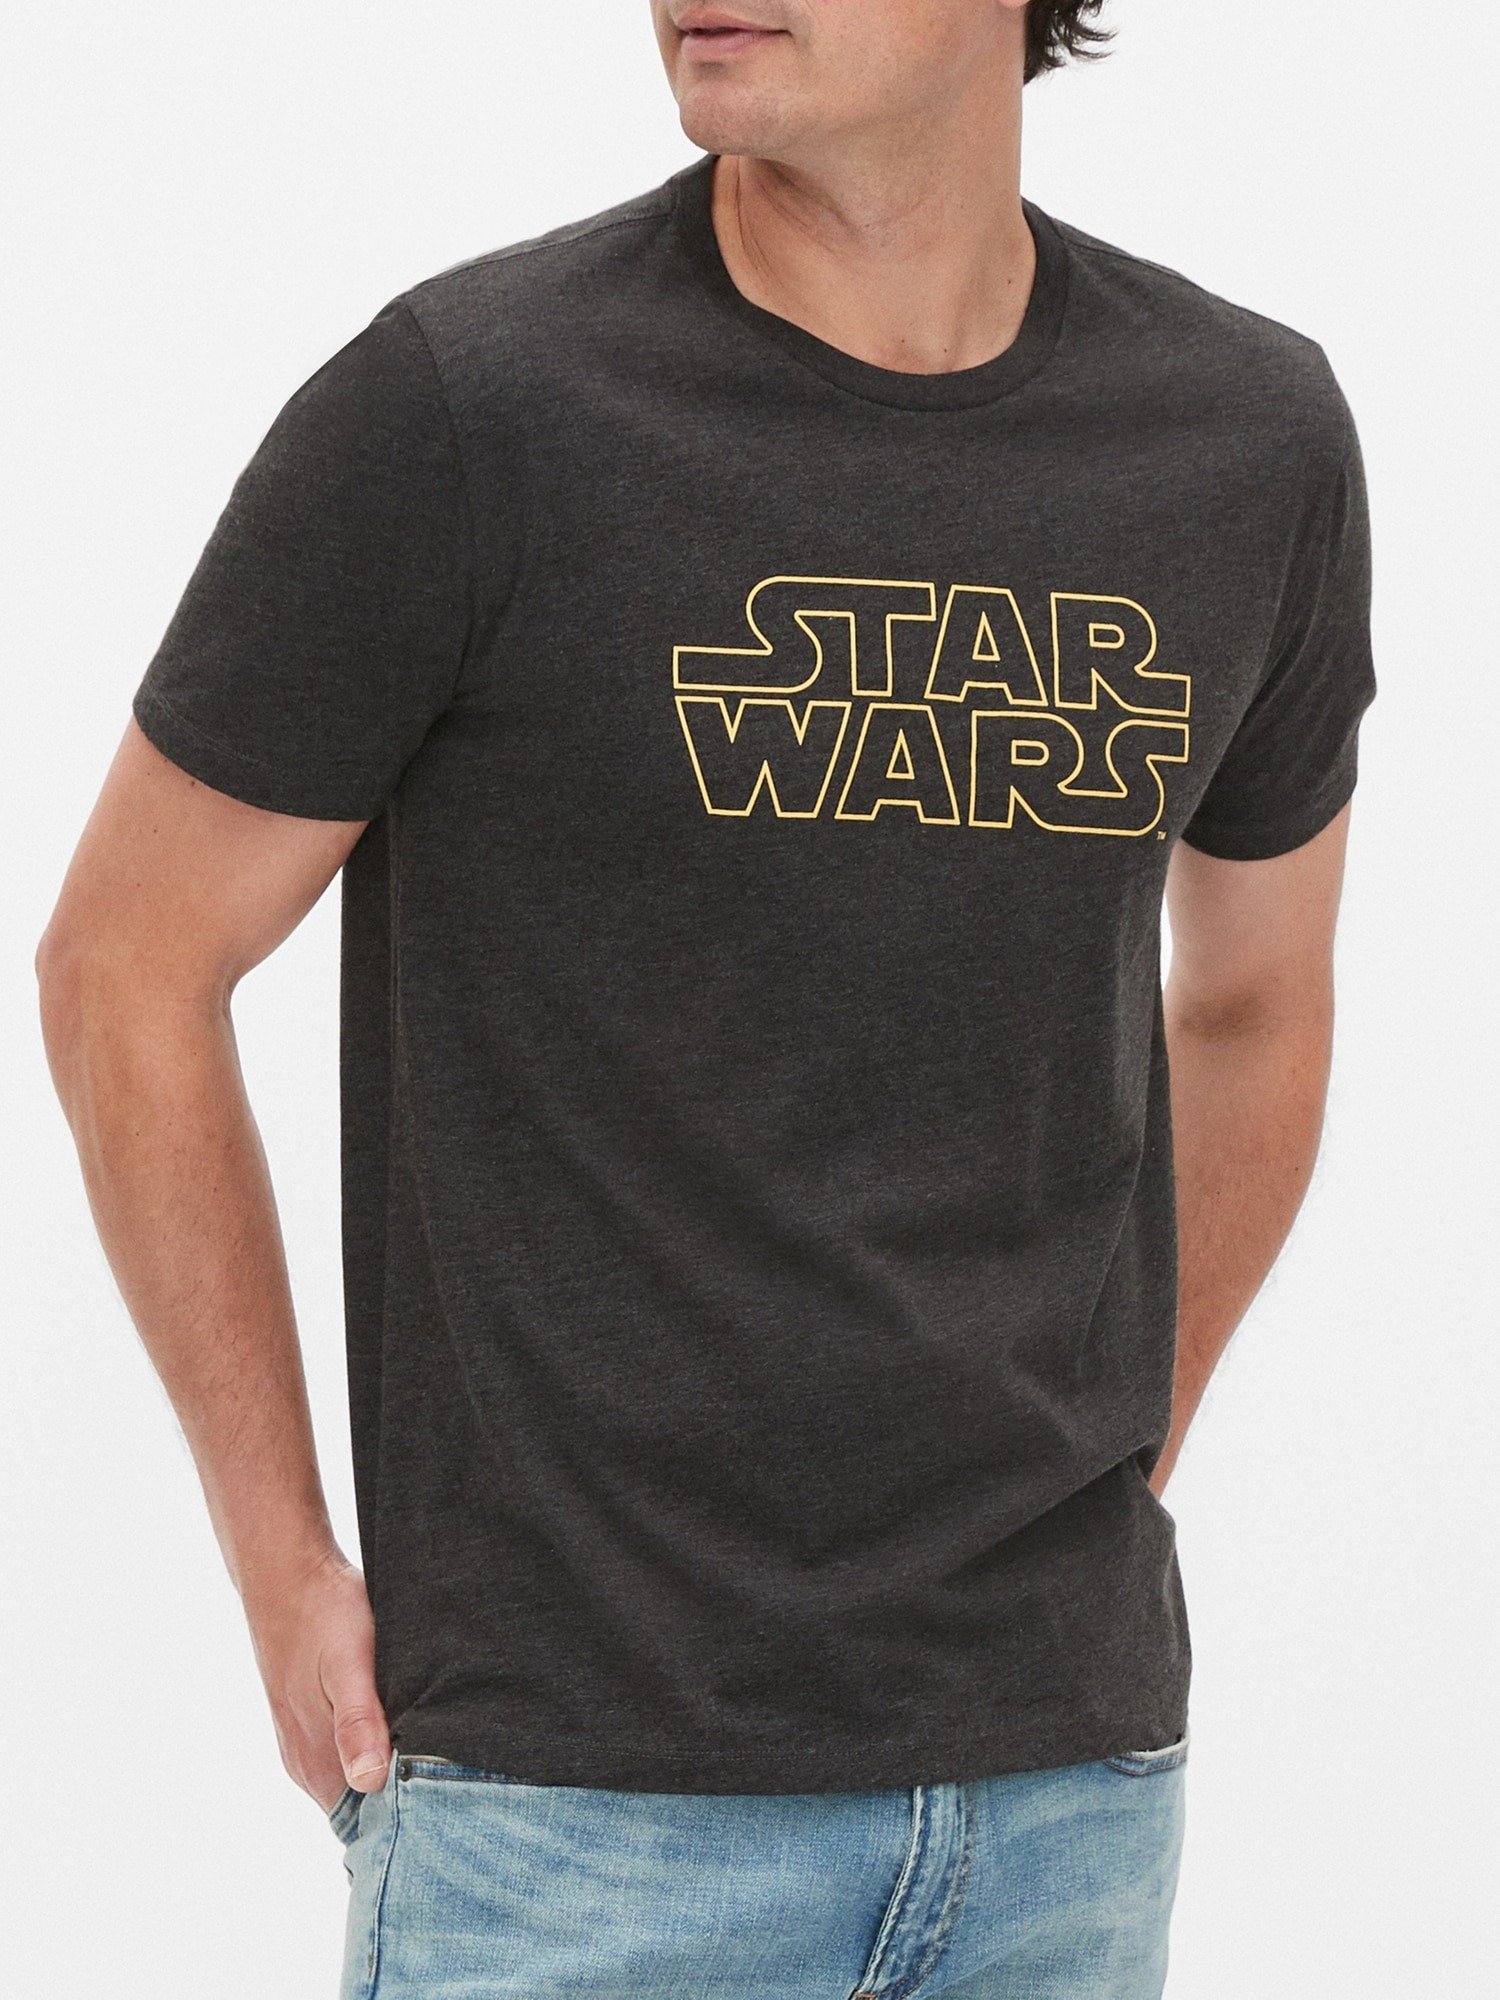 Star Wars™ Graphic T-Shirt product image